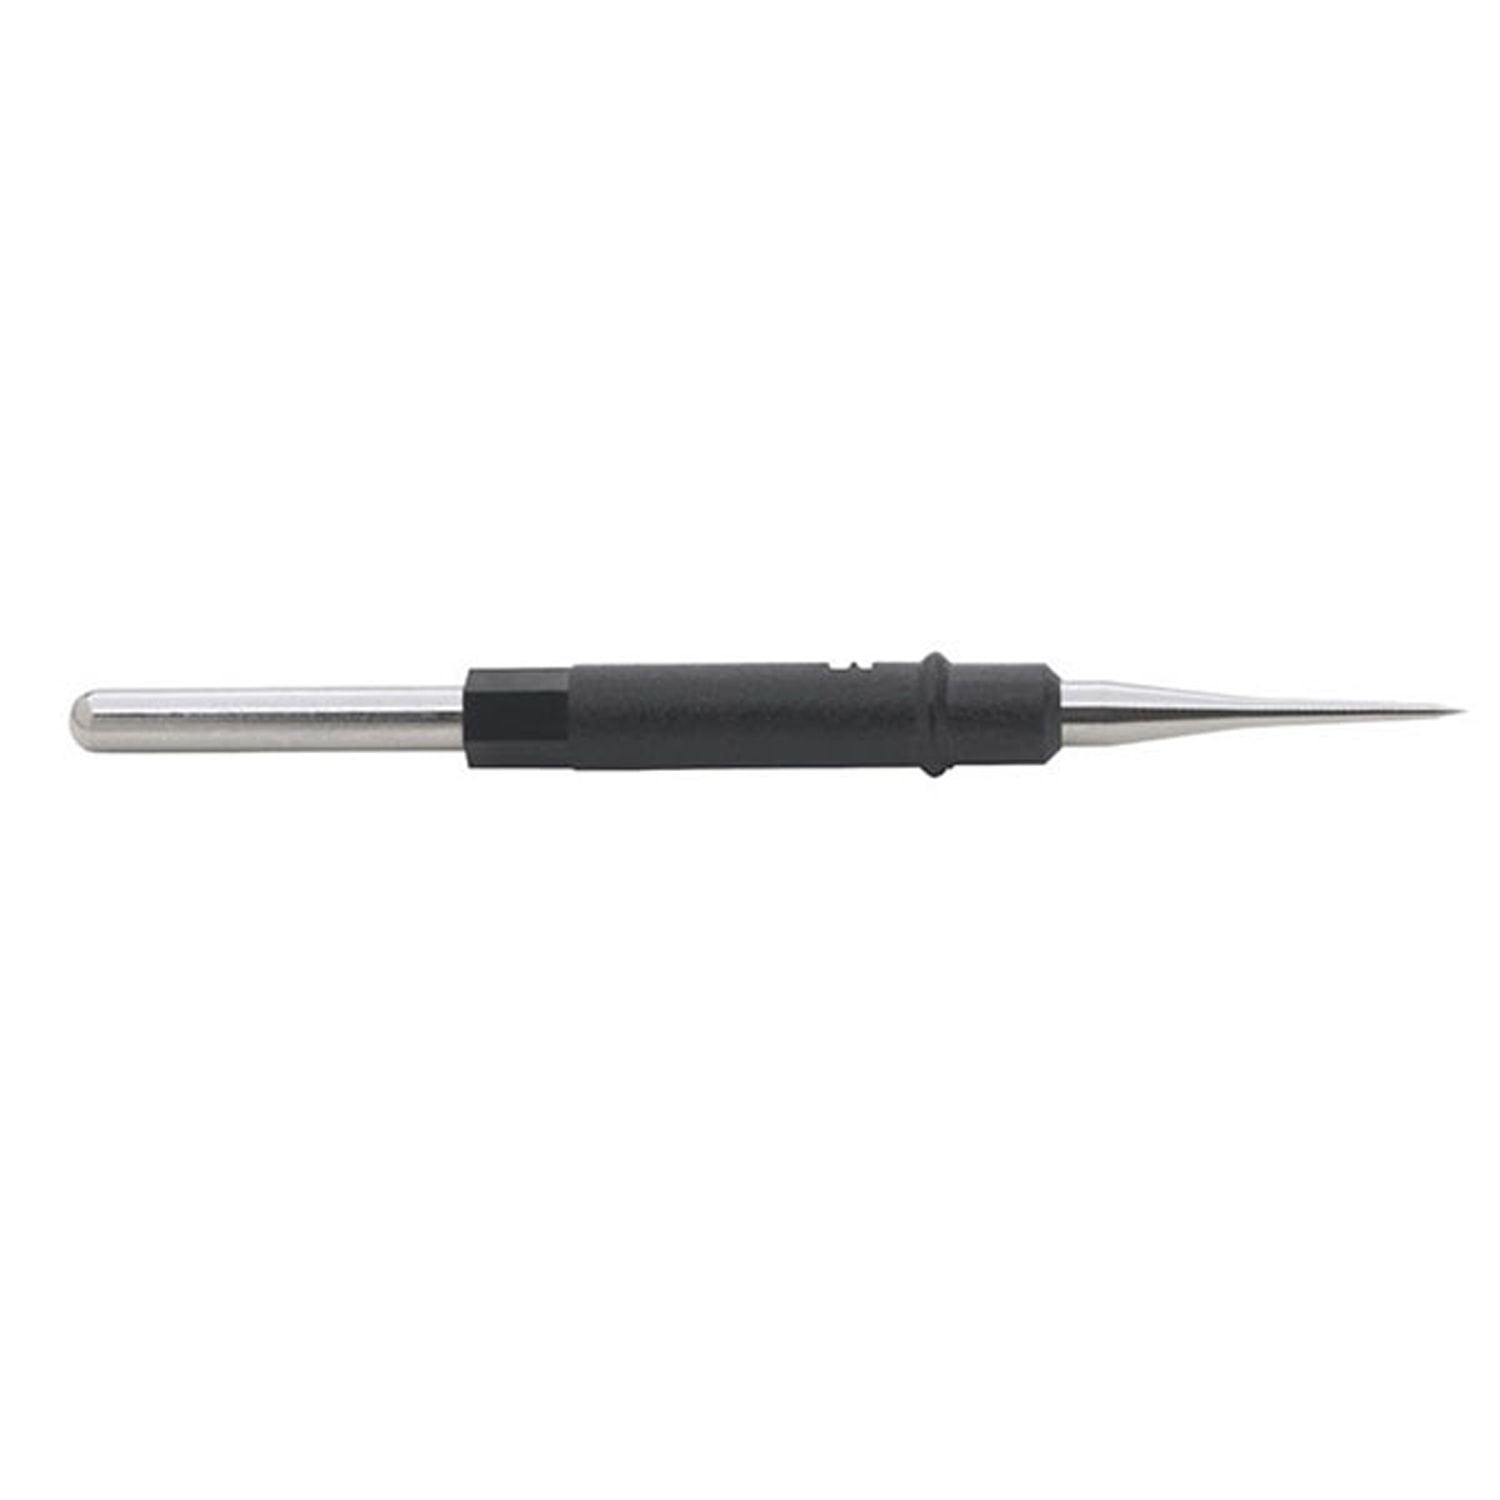 Reusable Vasectomy Desiccation Needle